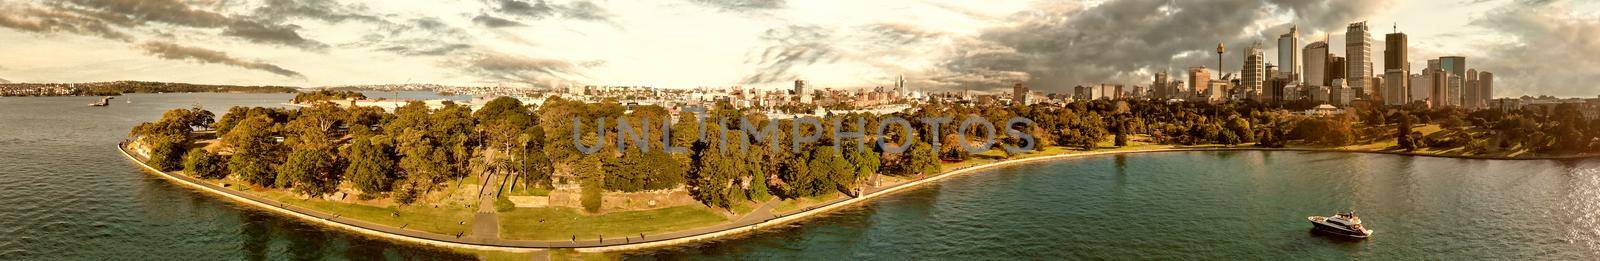 Panoramic aerial view of Sydney from Sydney Harbour Bay by jovannig